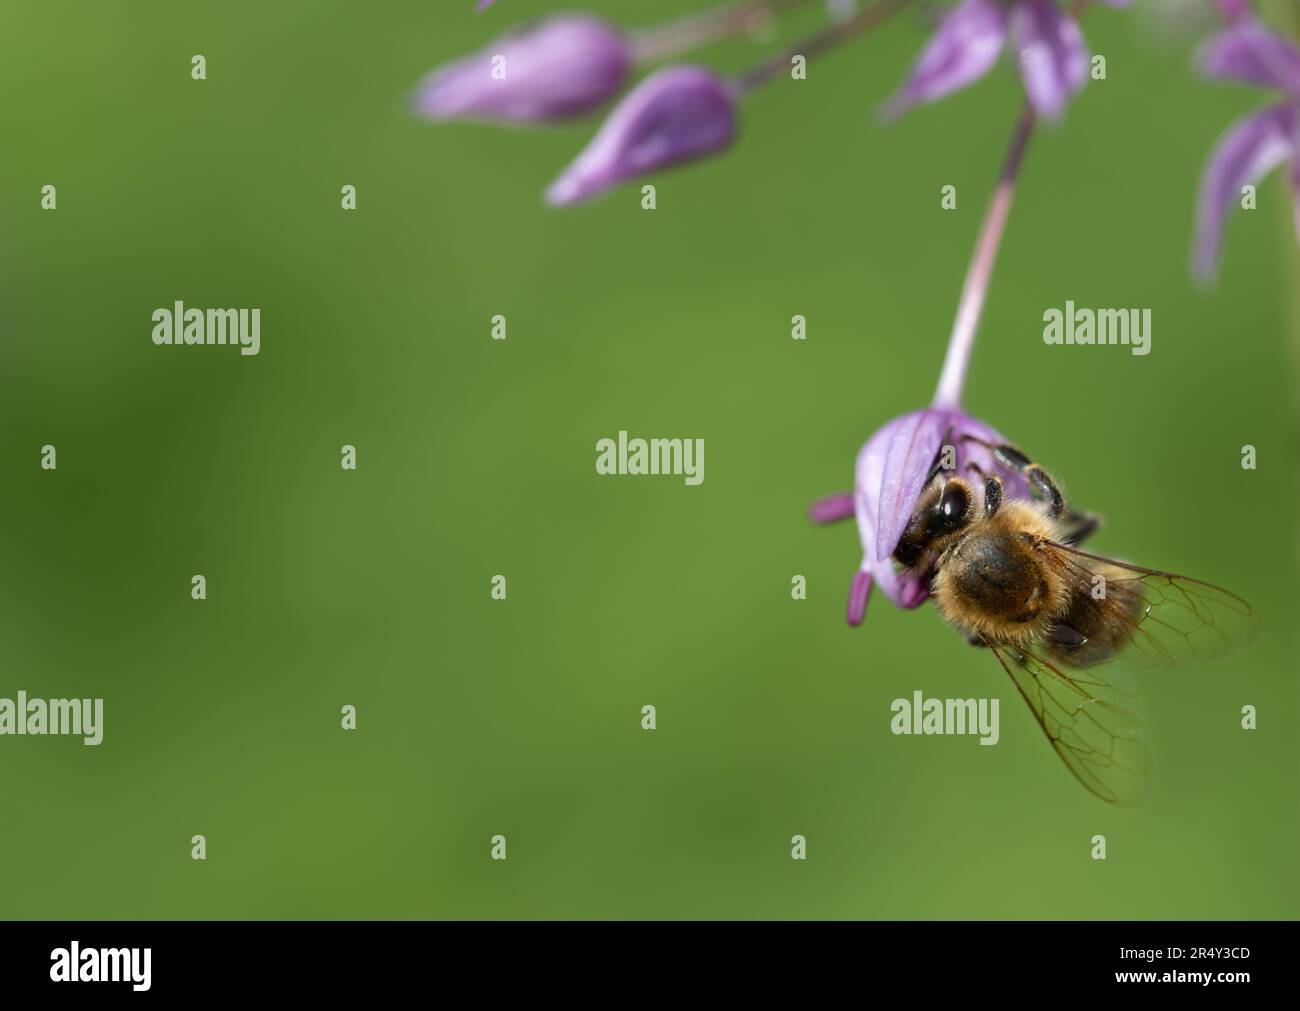 A small honey bee hangs on a purple allium flower. The bee puts its head in a calyx. There is plenty of room for text in the background Stock Photo